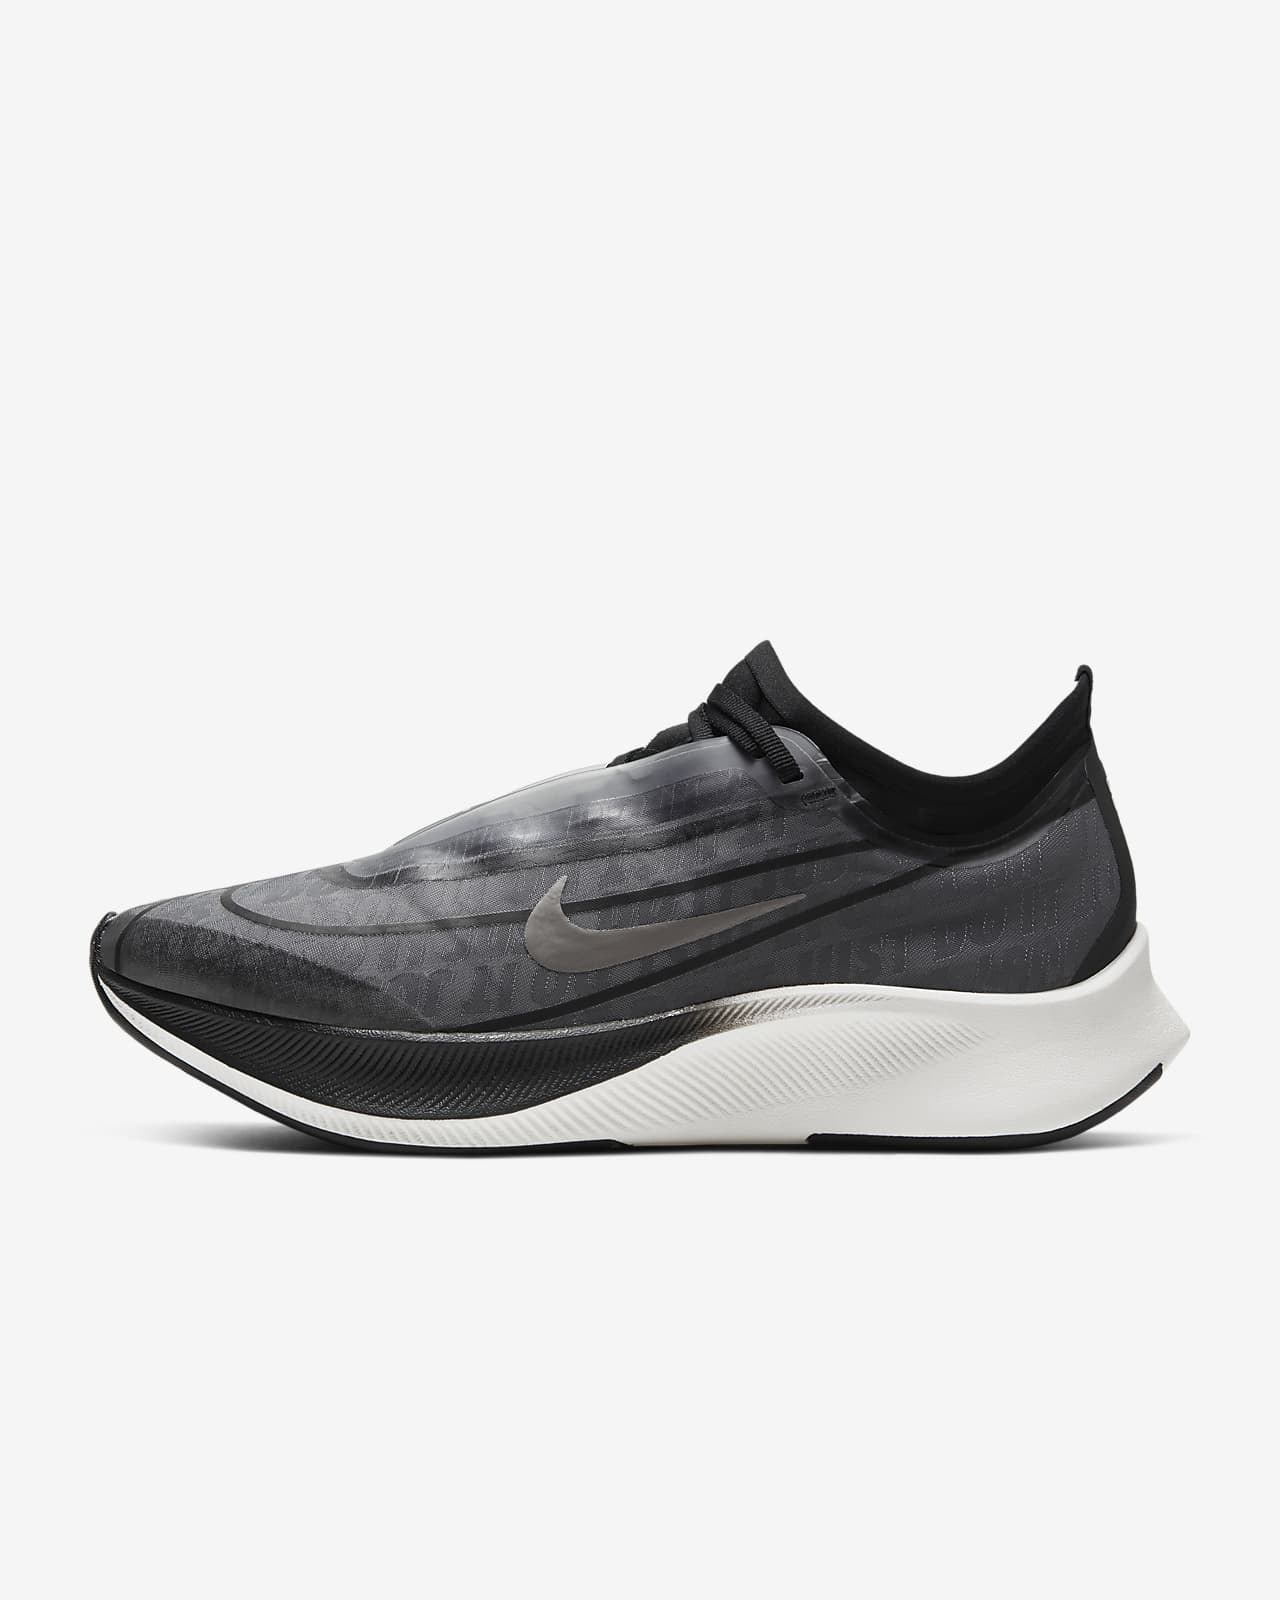 Nike Zoom Fly 3 Women's Road Running Shoes